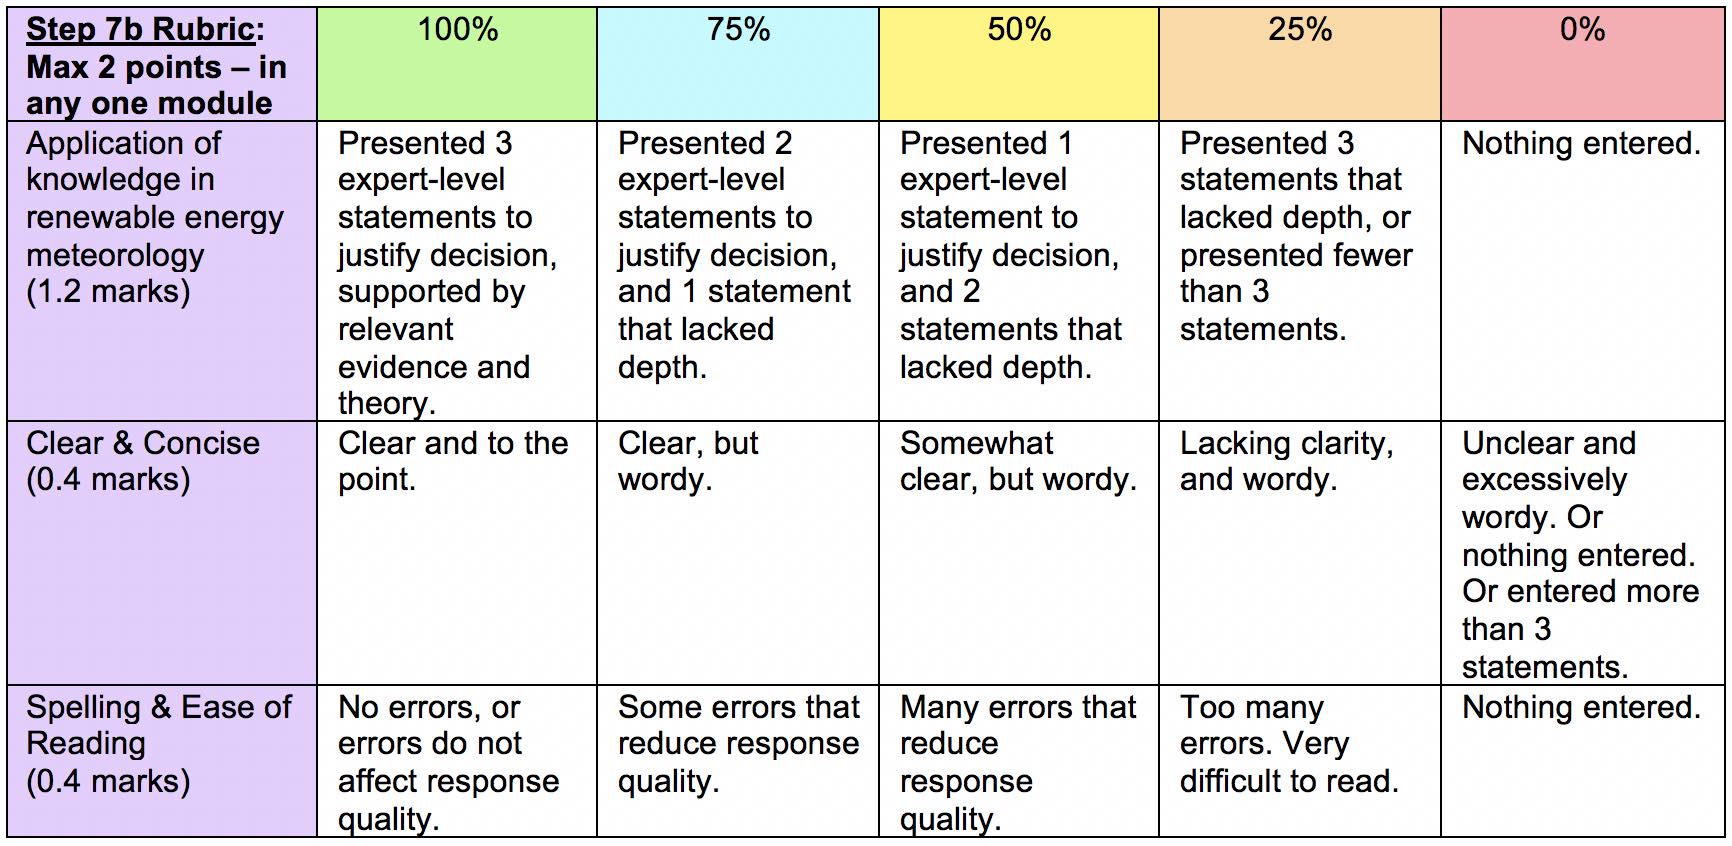 Rubric for step 7b